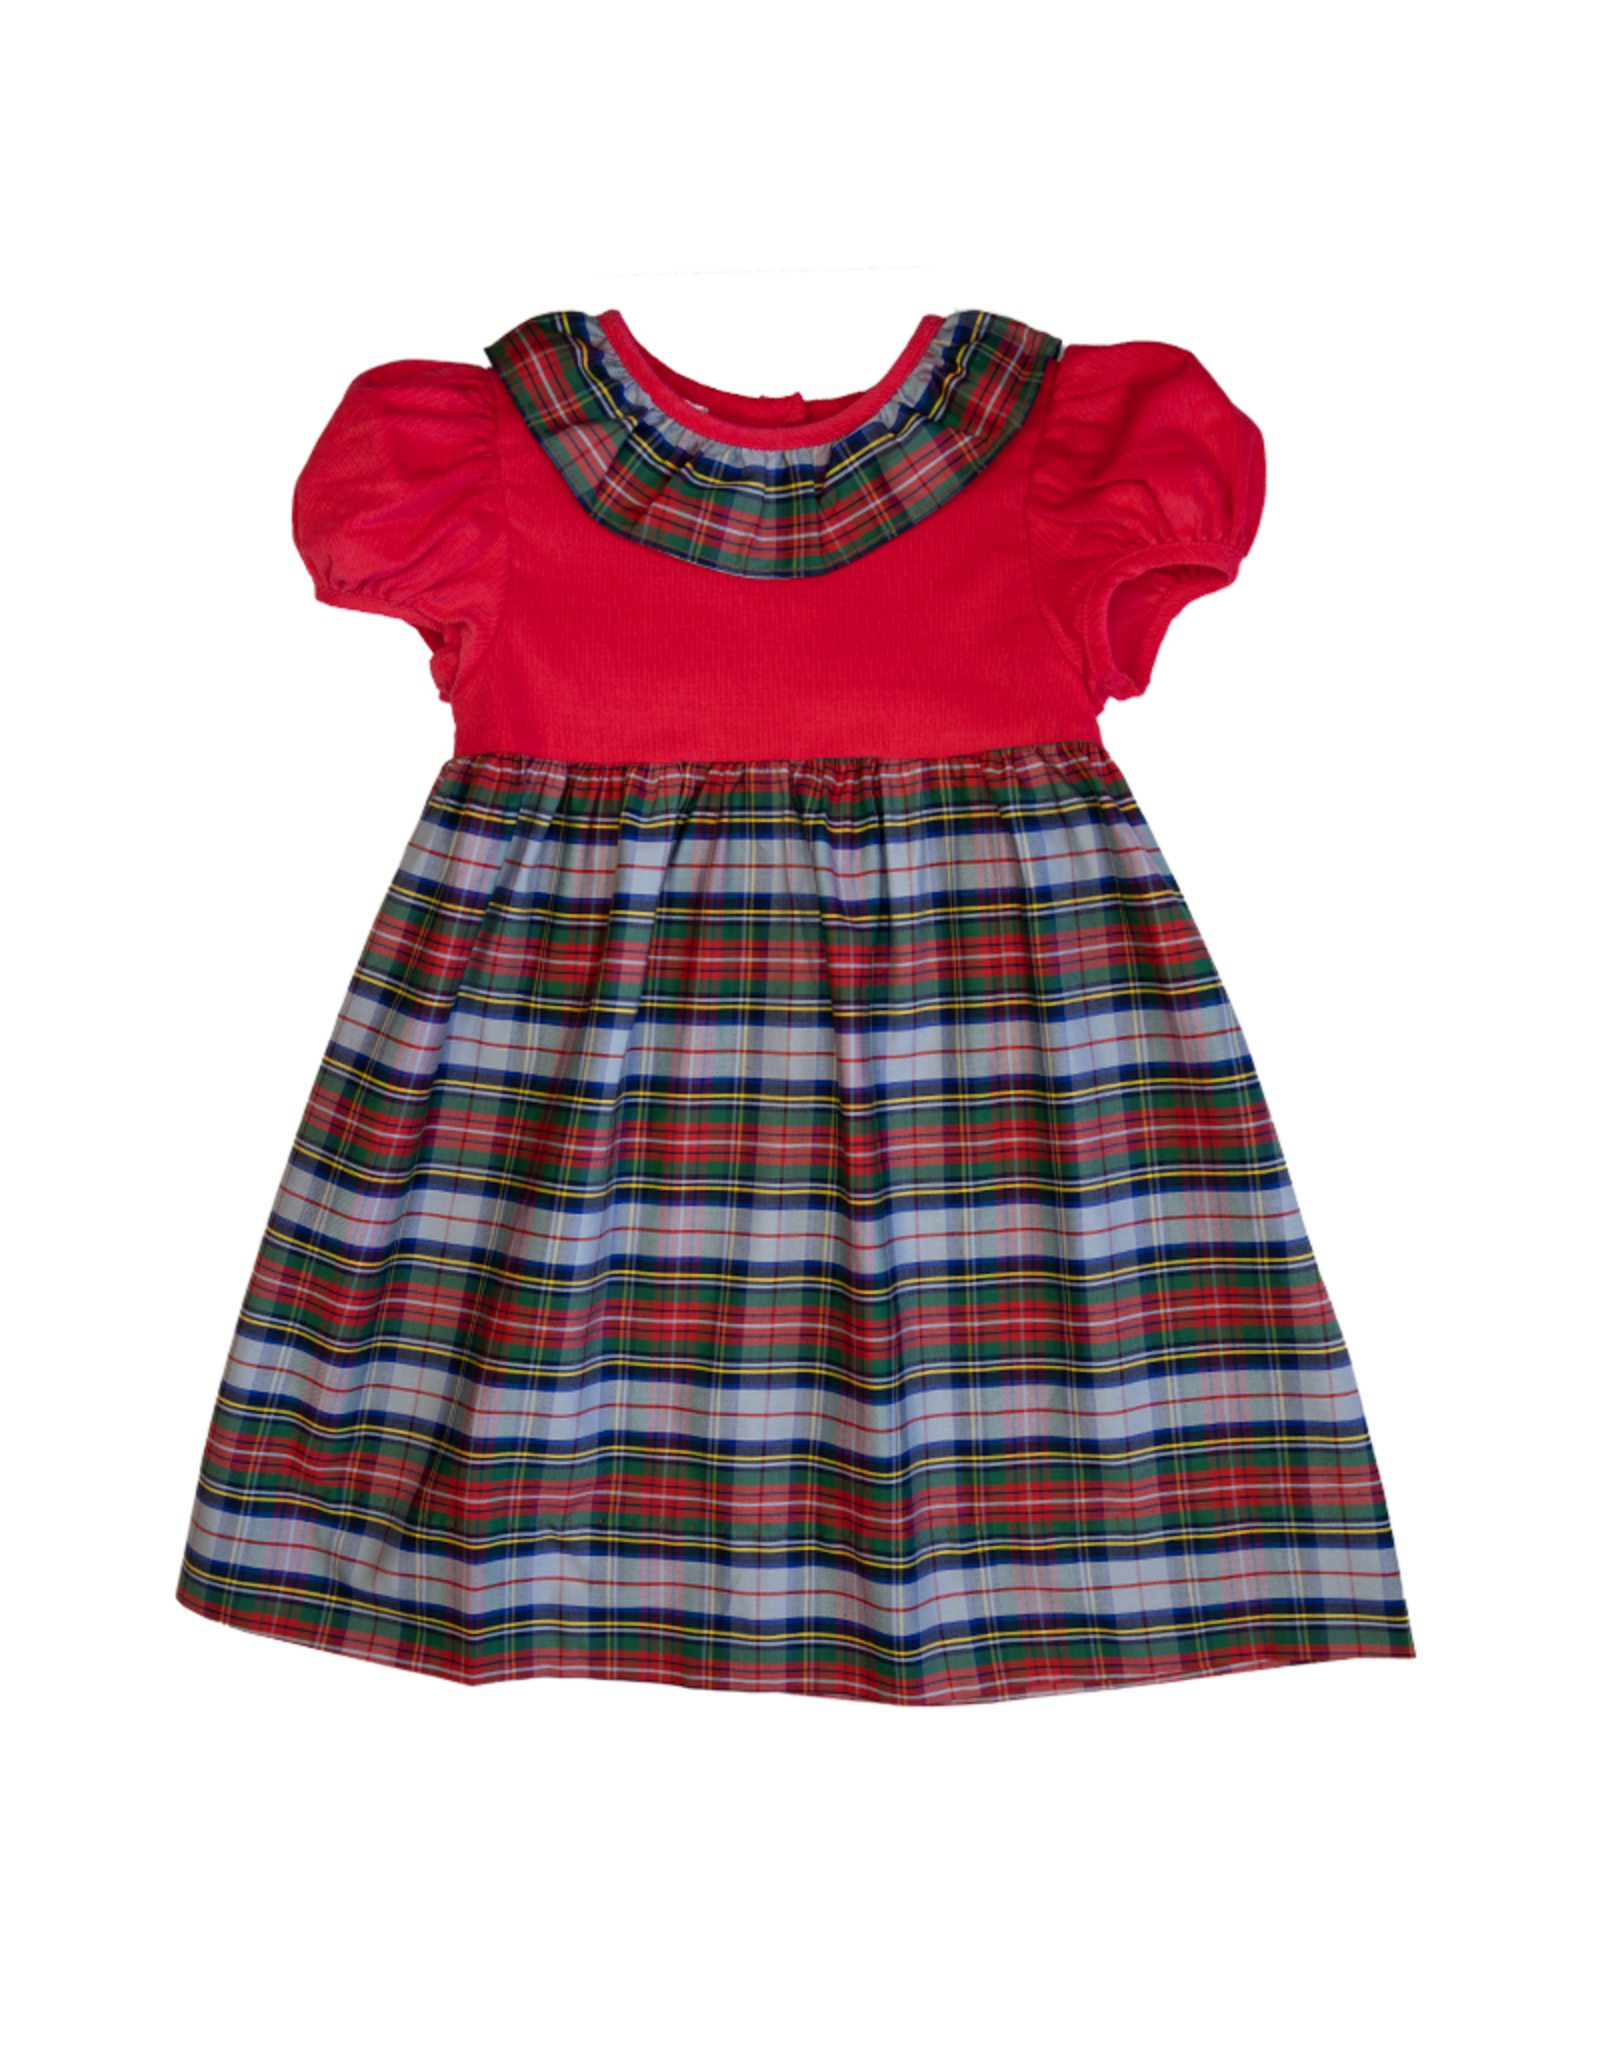 Baby Blessings BB0569 Red Plaid Dress